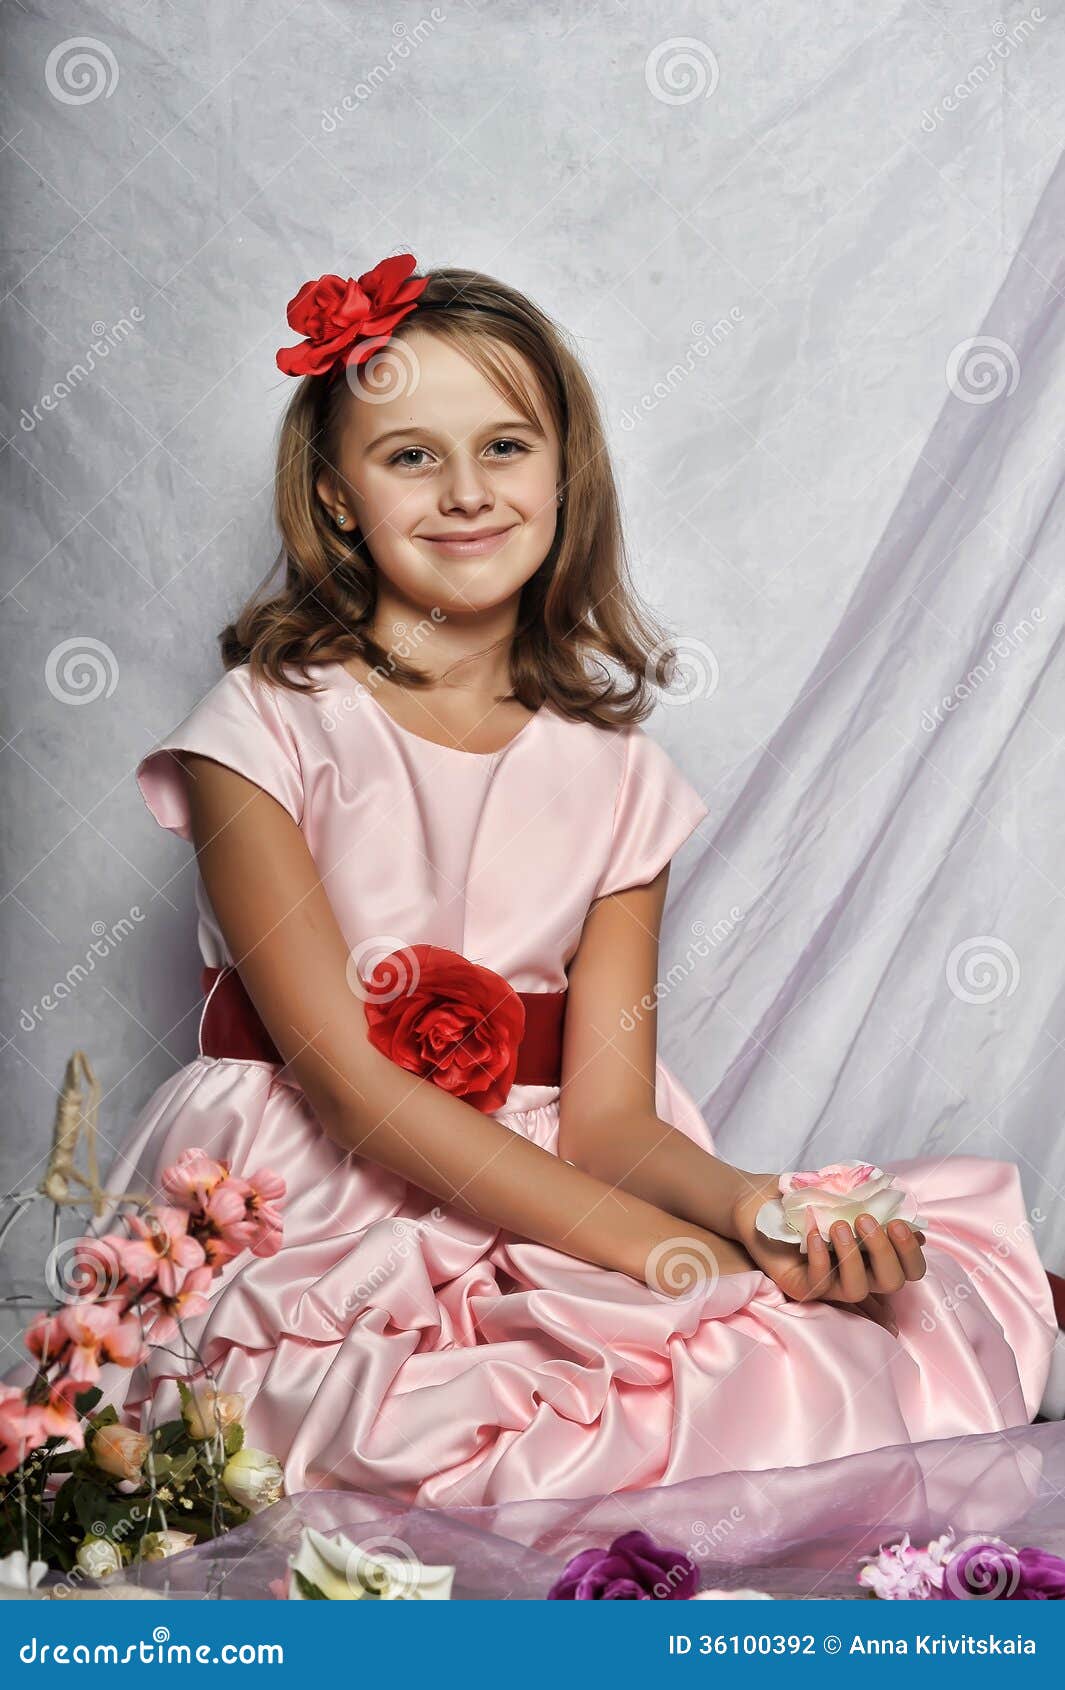 Elegant Portrait of Gorgeous Young Girl Stock Photo - Image of ...